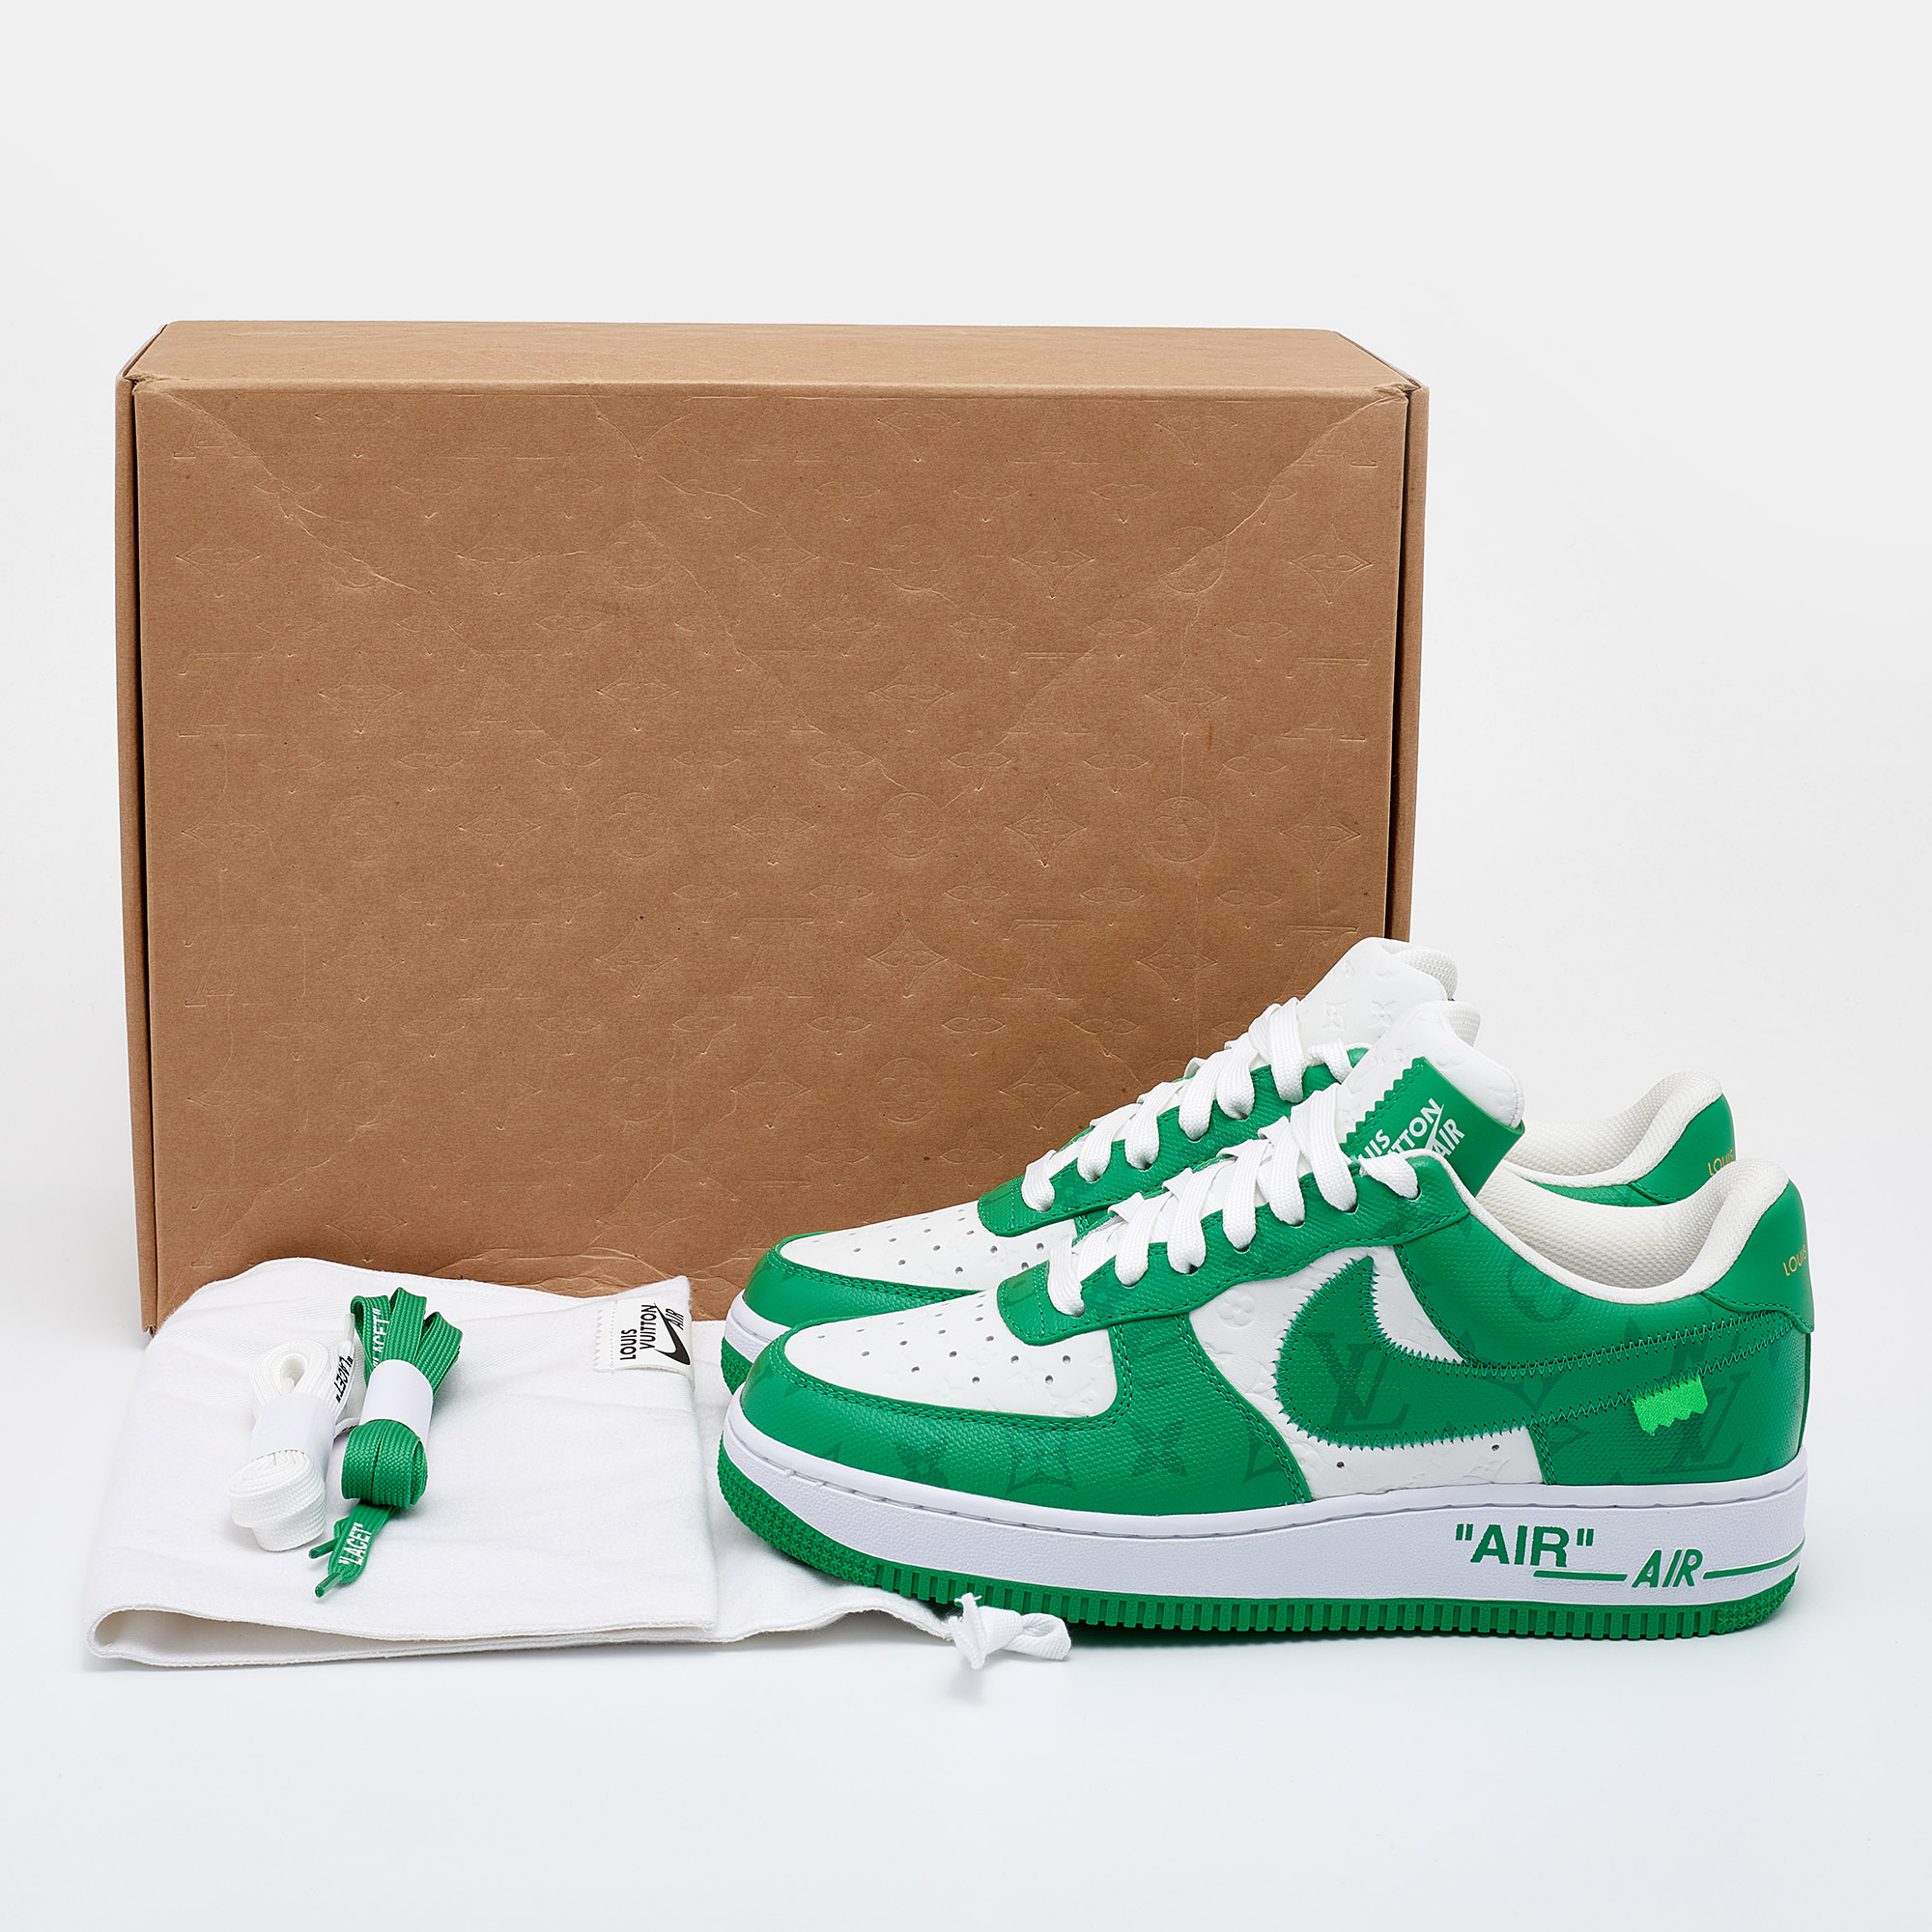 Louis Vuitton X Nike By Virgil Abloh Green/White Monogram Embossed Leather Nike Air Force 1 Low Top Sneakers Size 39